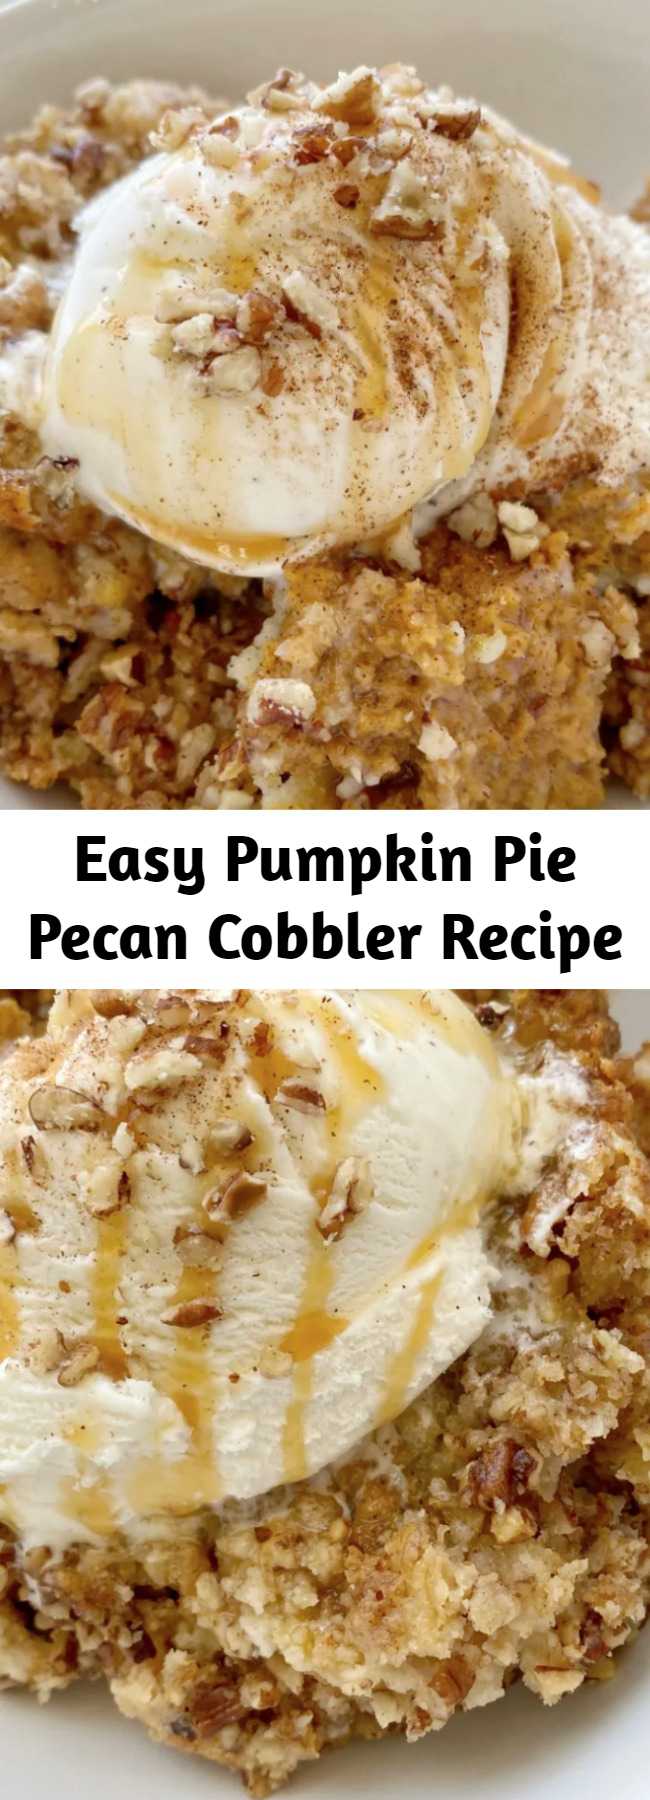 Easy Pumpkin Pie Pecan Cobbler Recipe - Pumpkin Pie Pecan Cobbler has a creamy pumpkin pie layer topped with a sweet spiced pecan crumble topping. Serve with a scoop of vanilla ice cream for the best pumpkin cobbler recipe that's perfect for Fall.